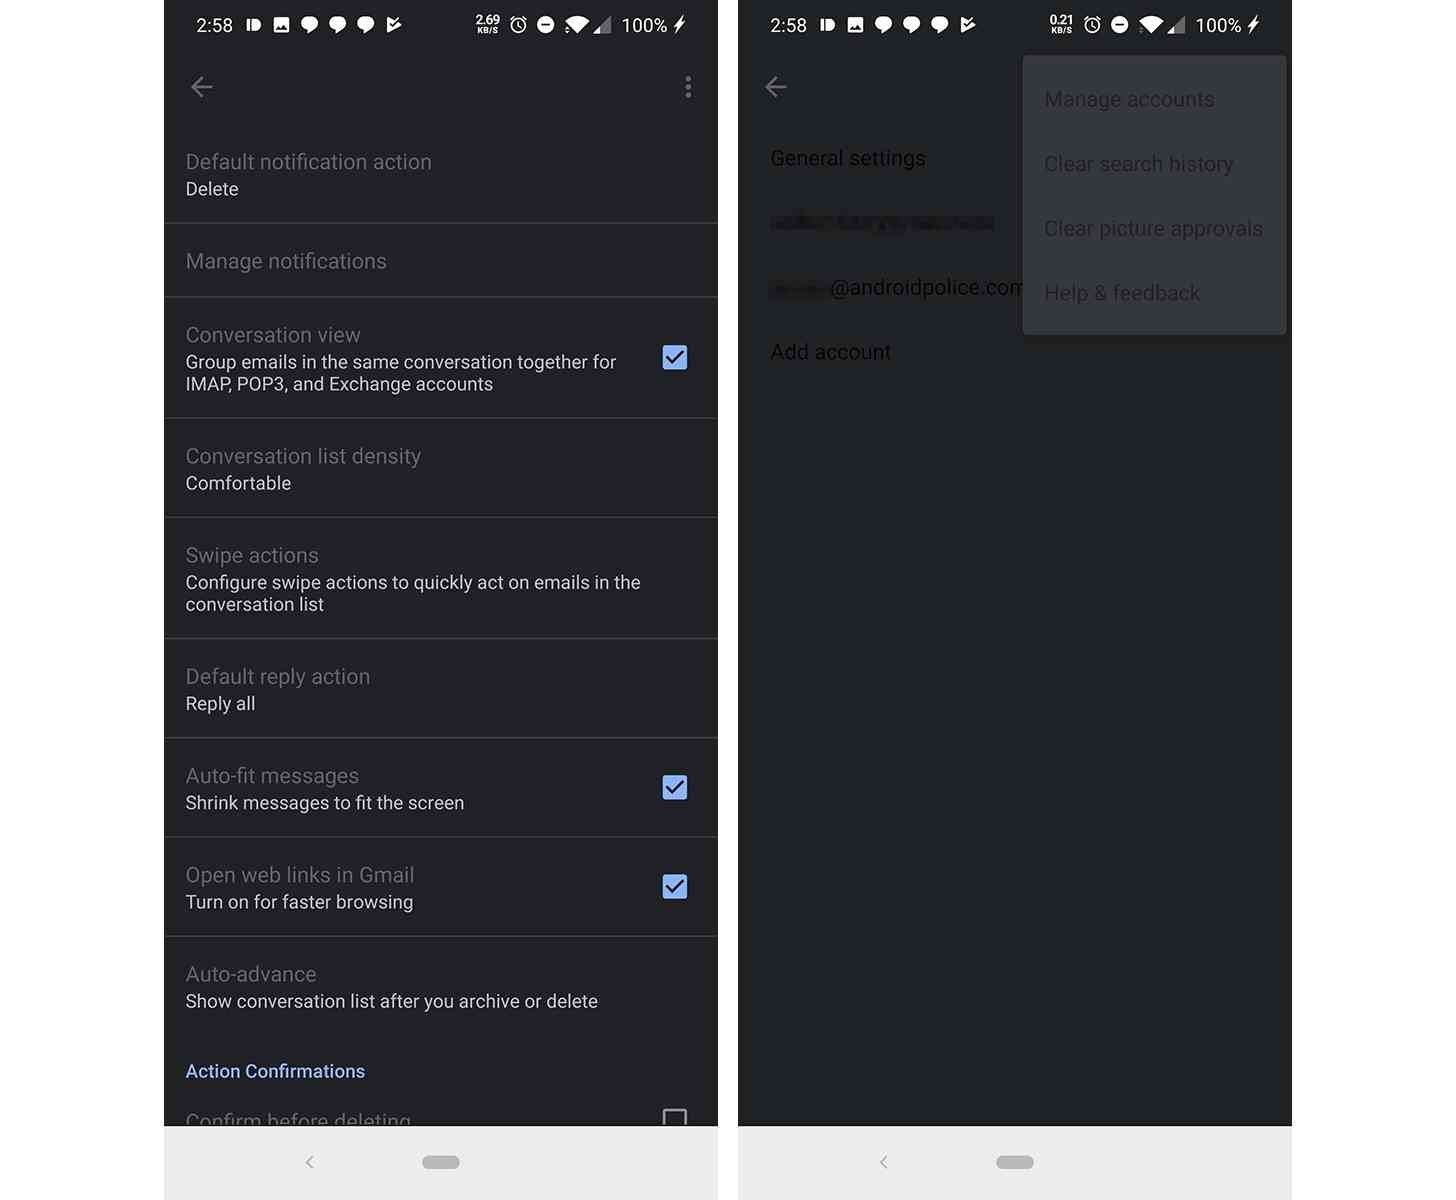 Gmail On Samsungs Android 9 Pie Tablet Already Has Darkish